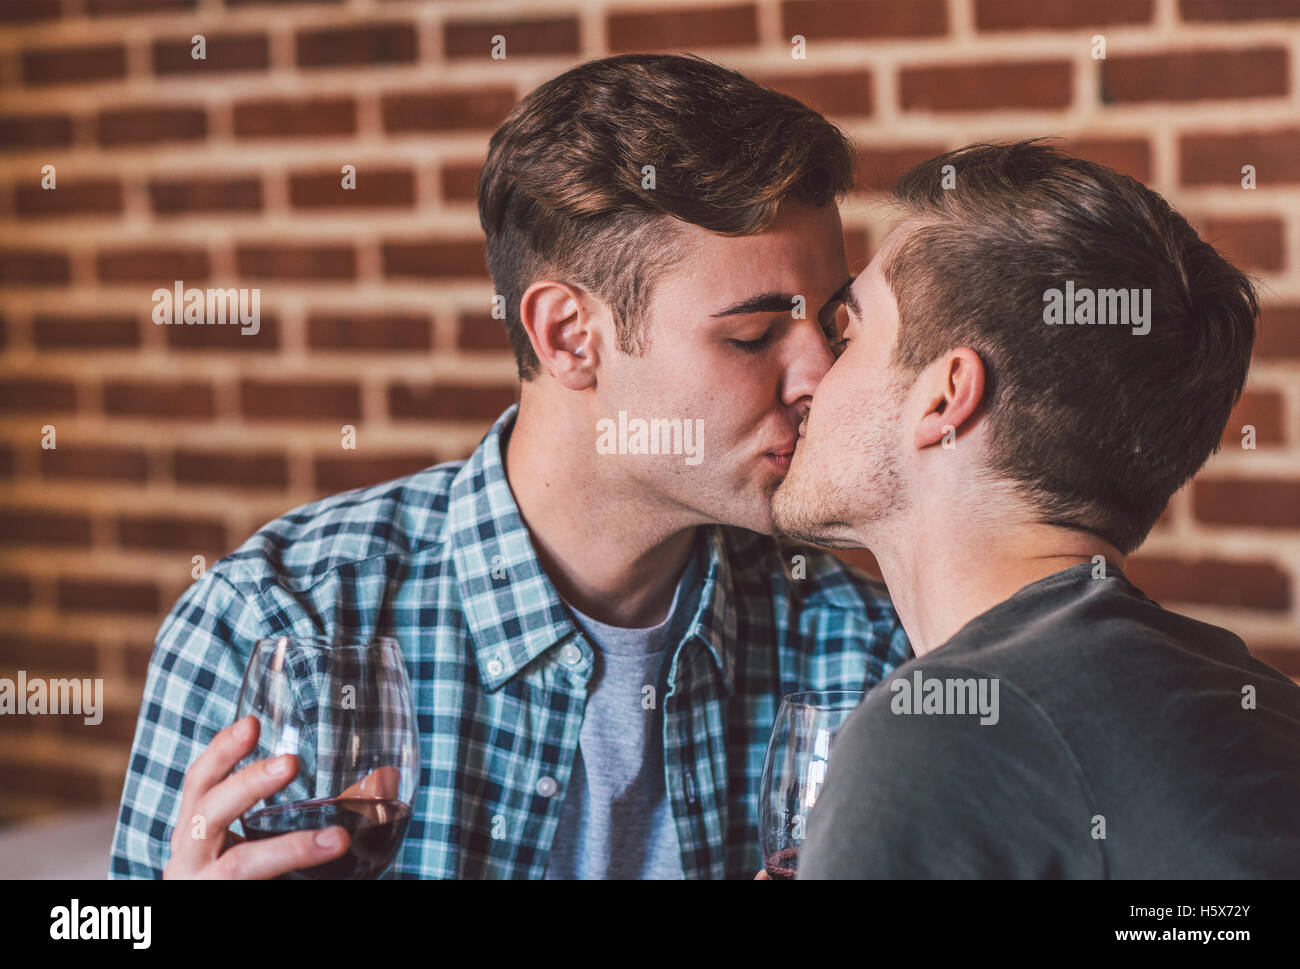 They couldn't be any more in love Stock Photo